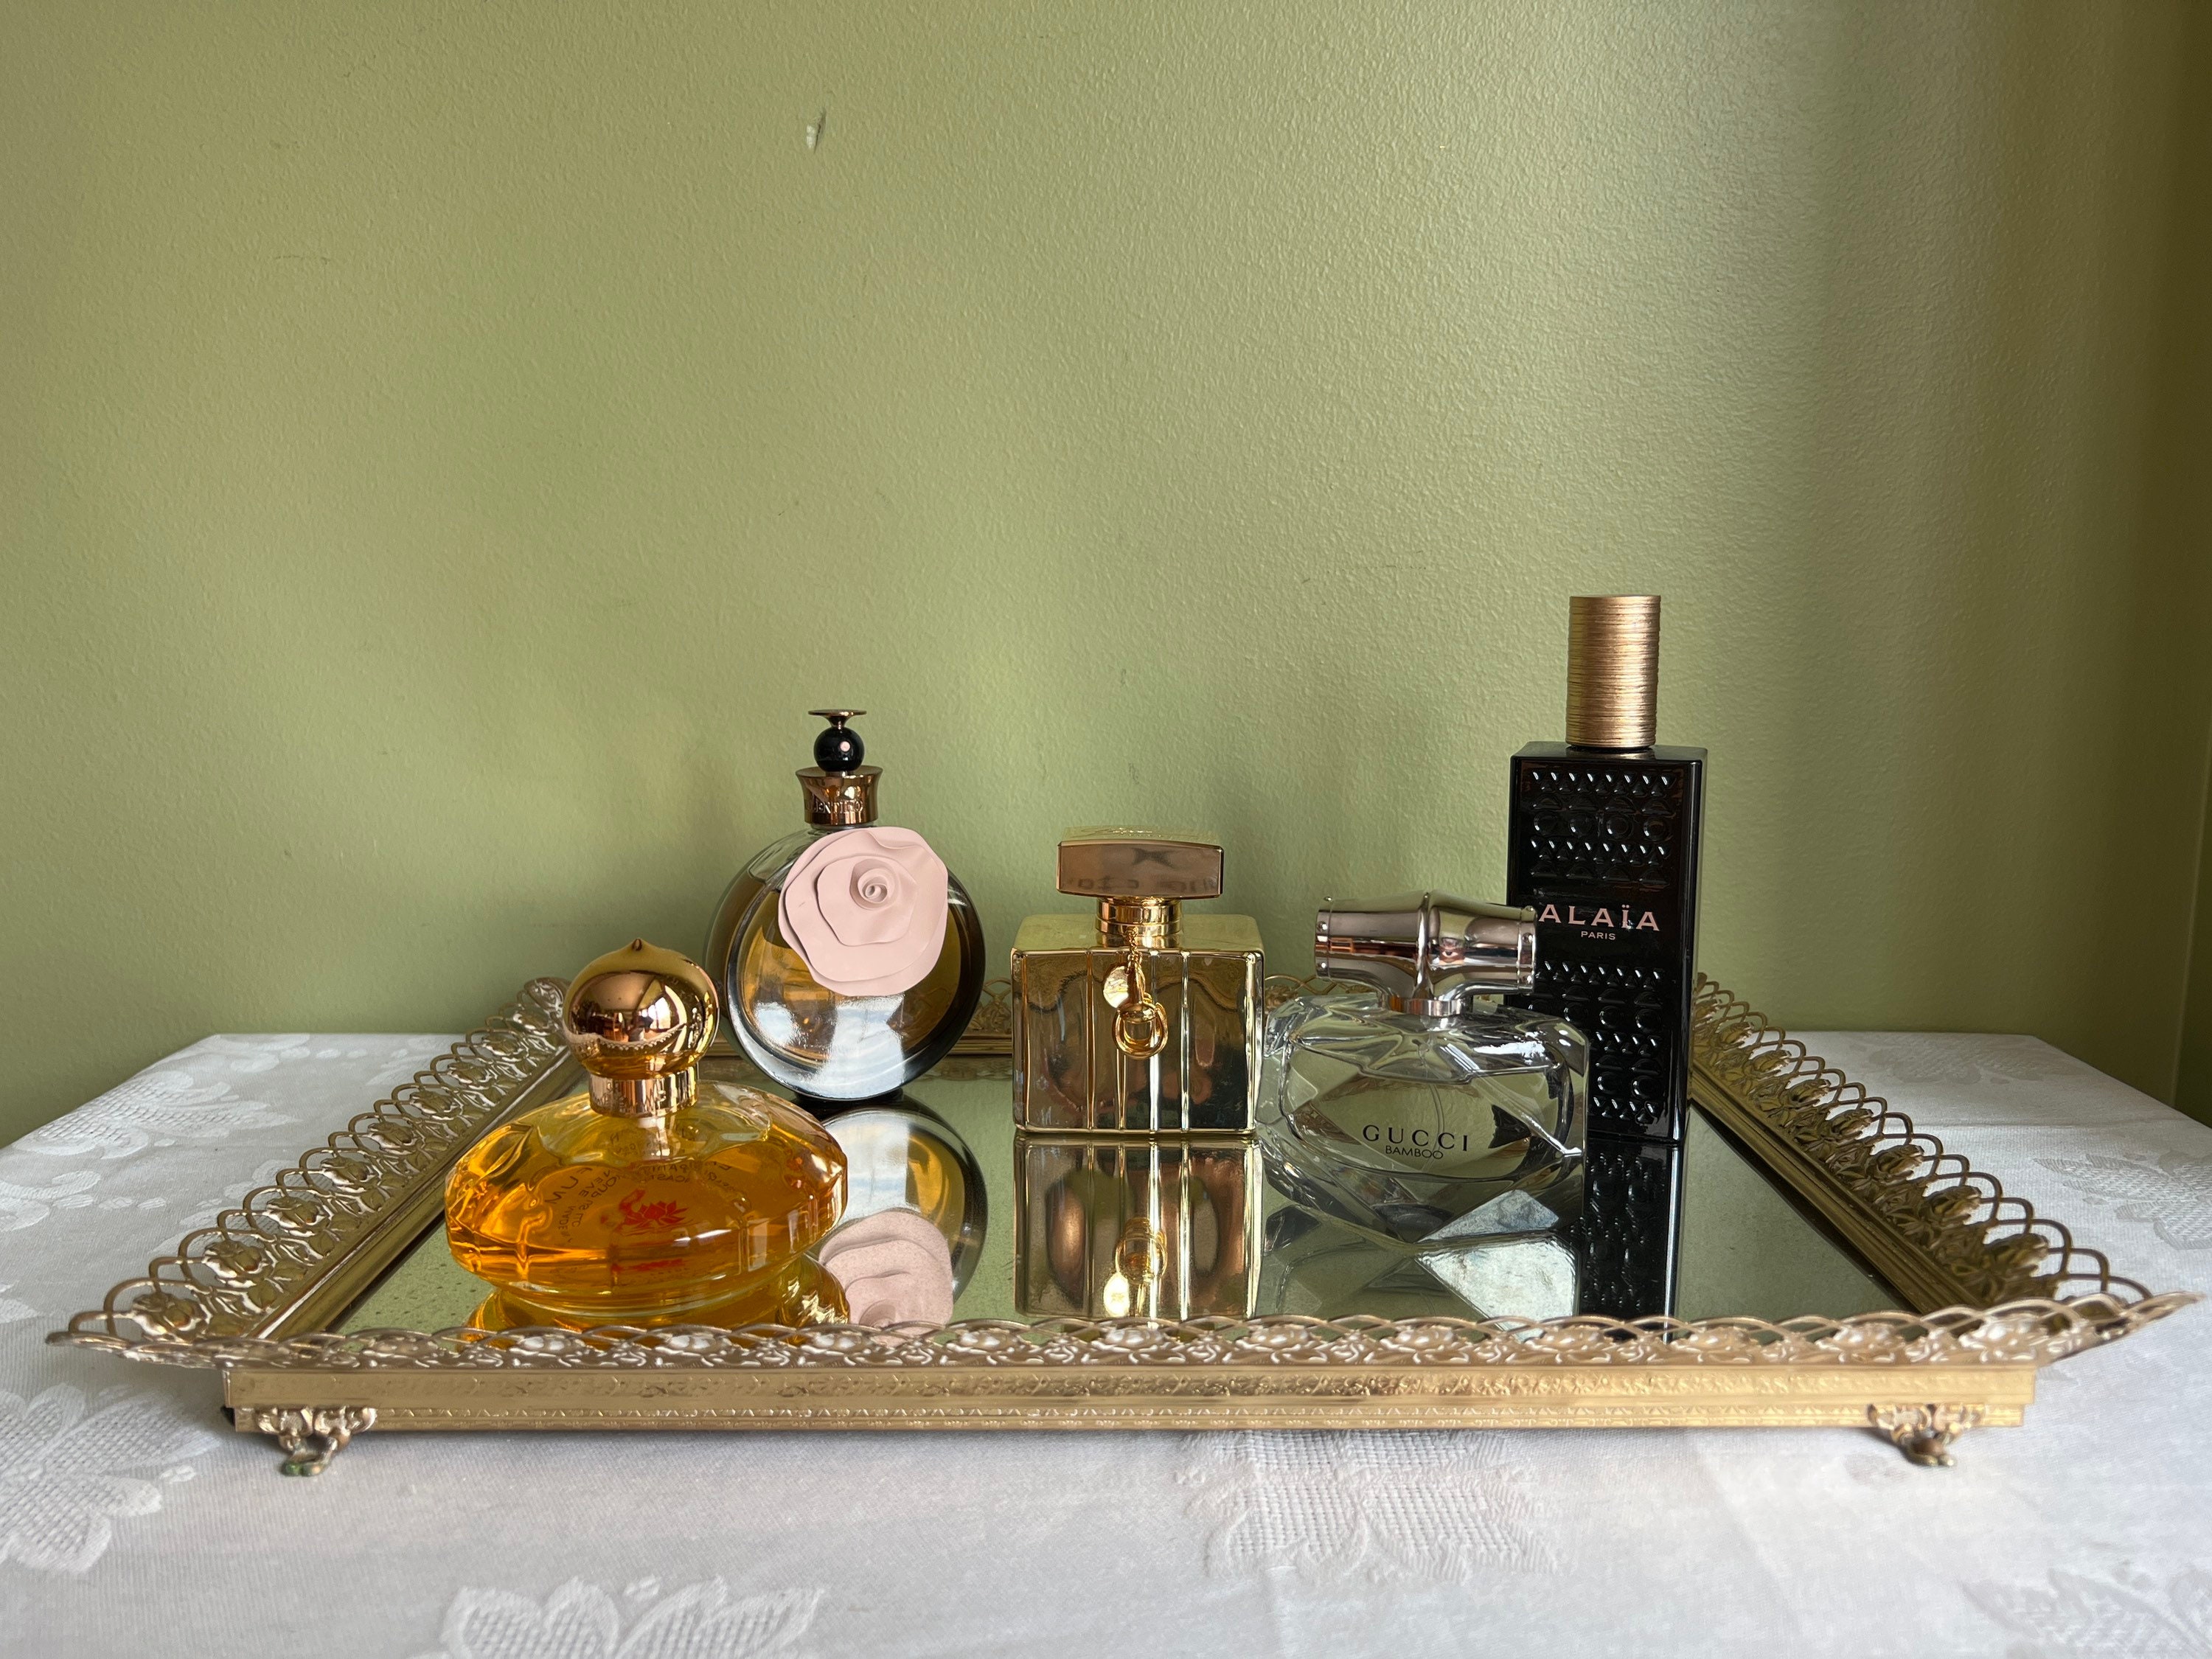 Chanel Glam set up - Mirror vanity tray, candle and perfume bottles all  crafted by me